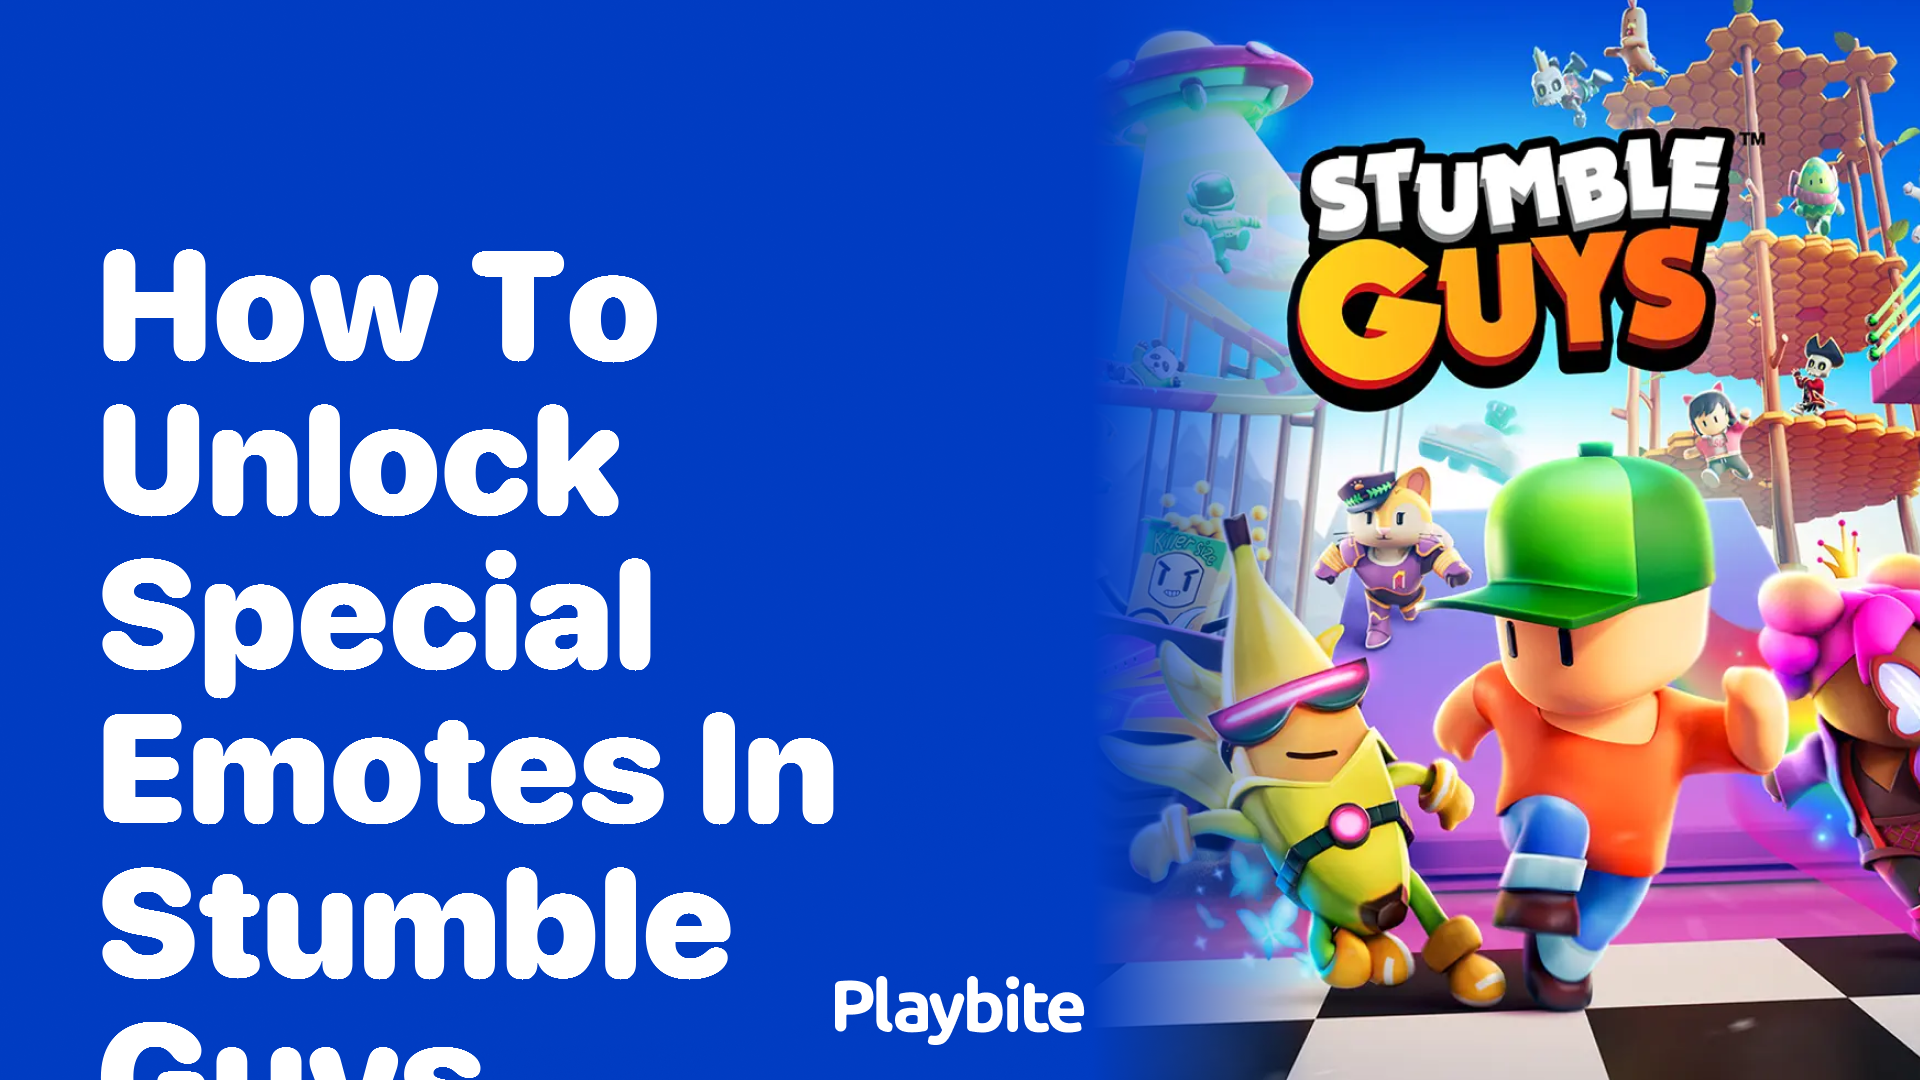 How to Unlock Special Emotes in Stumble Guys